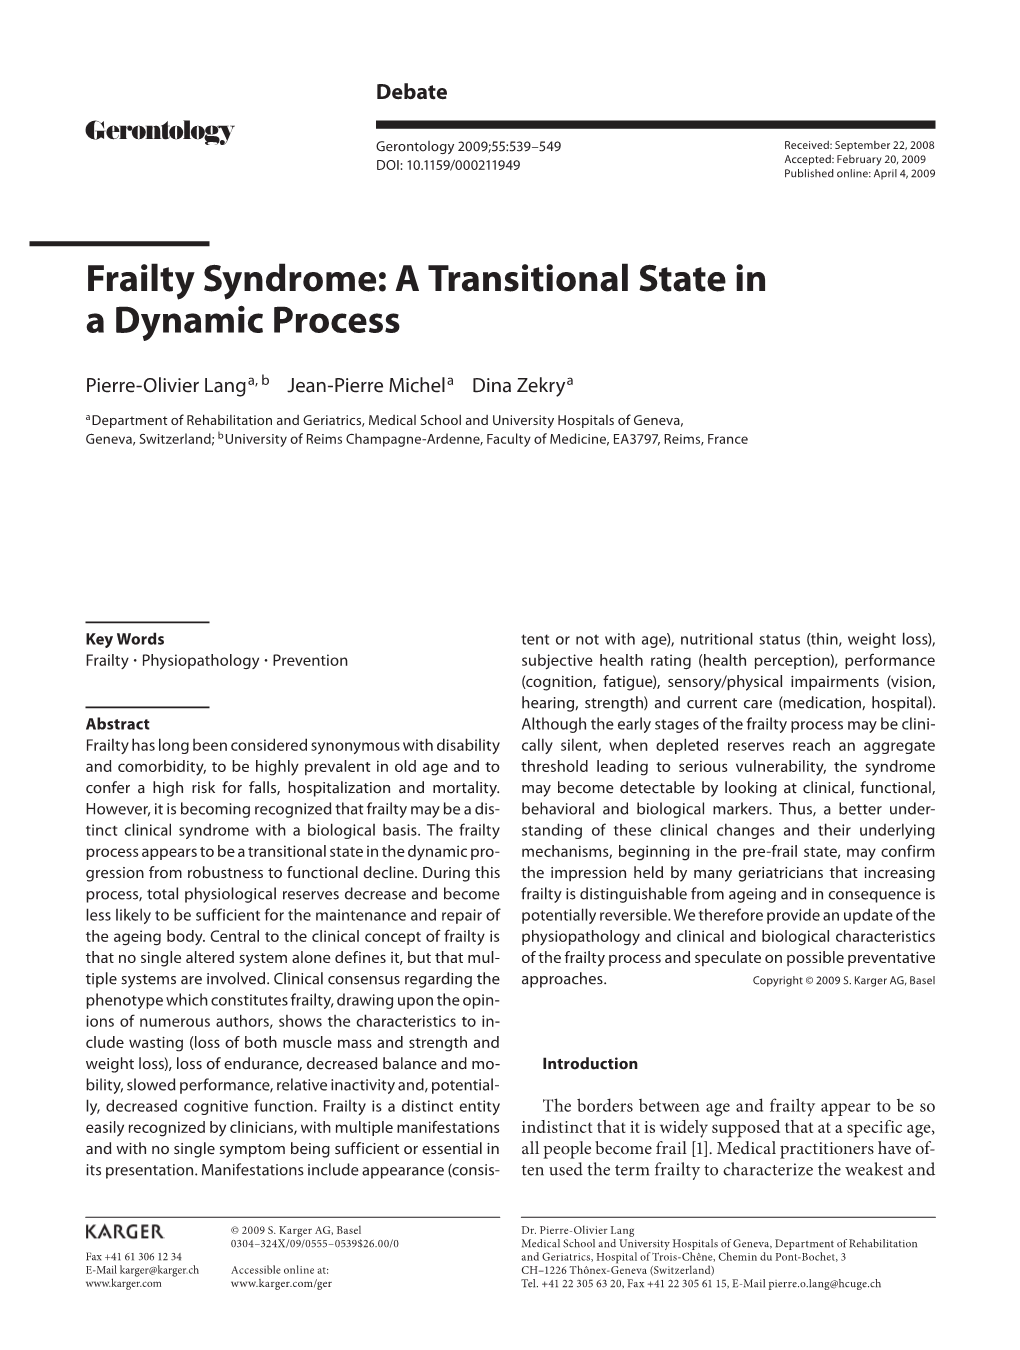 Frailty Syndrome: a Transitional State in a Dynamic Process